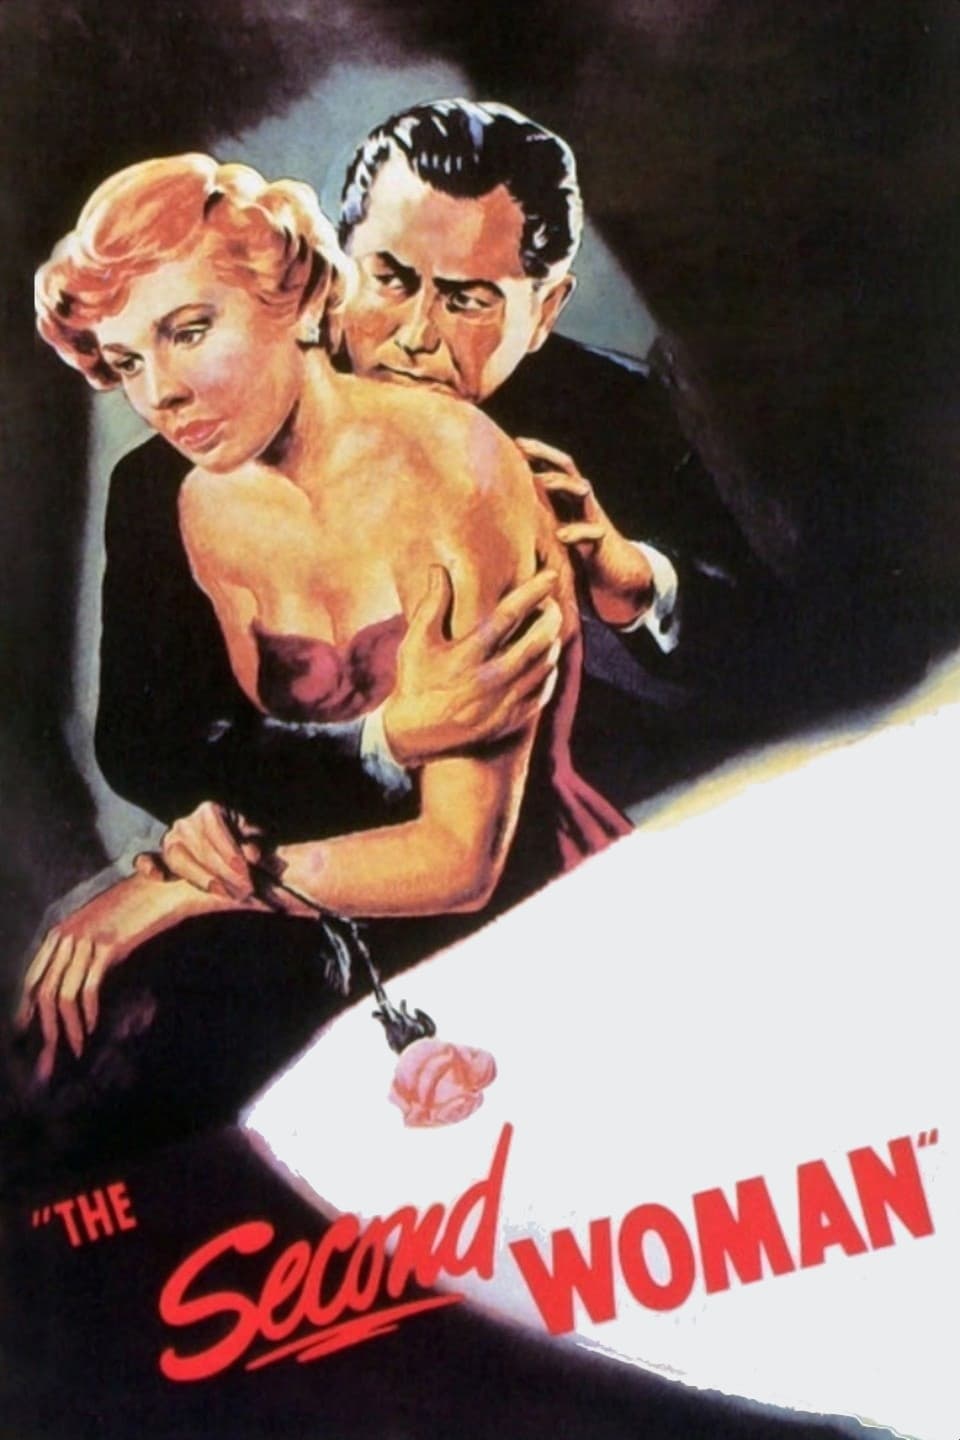 The Second Woman (1950)